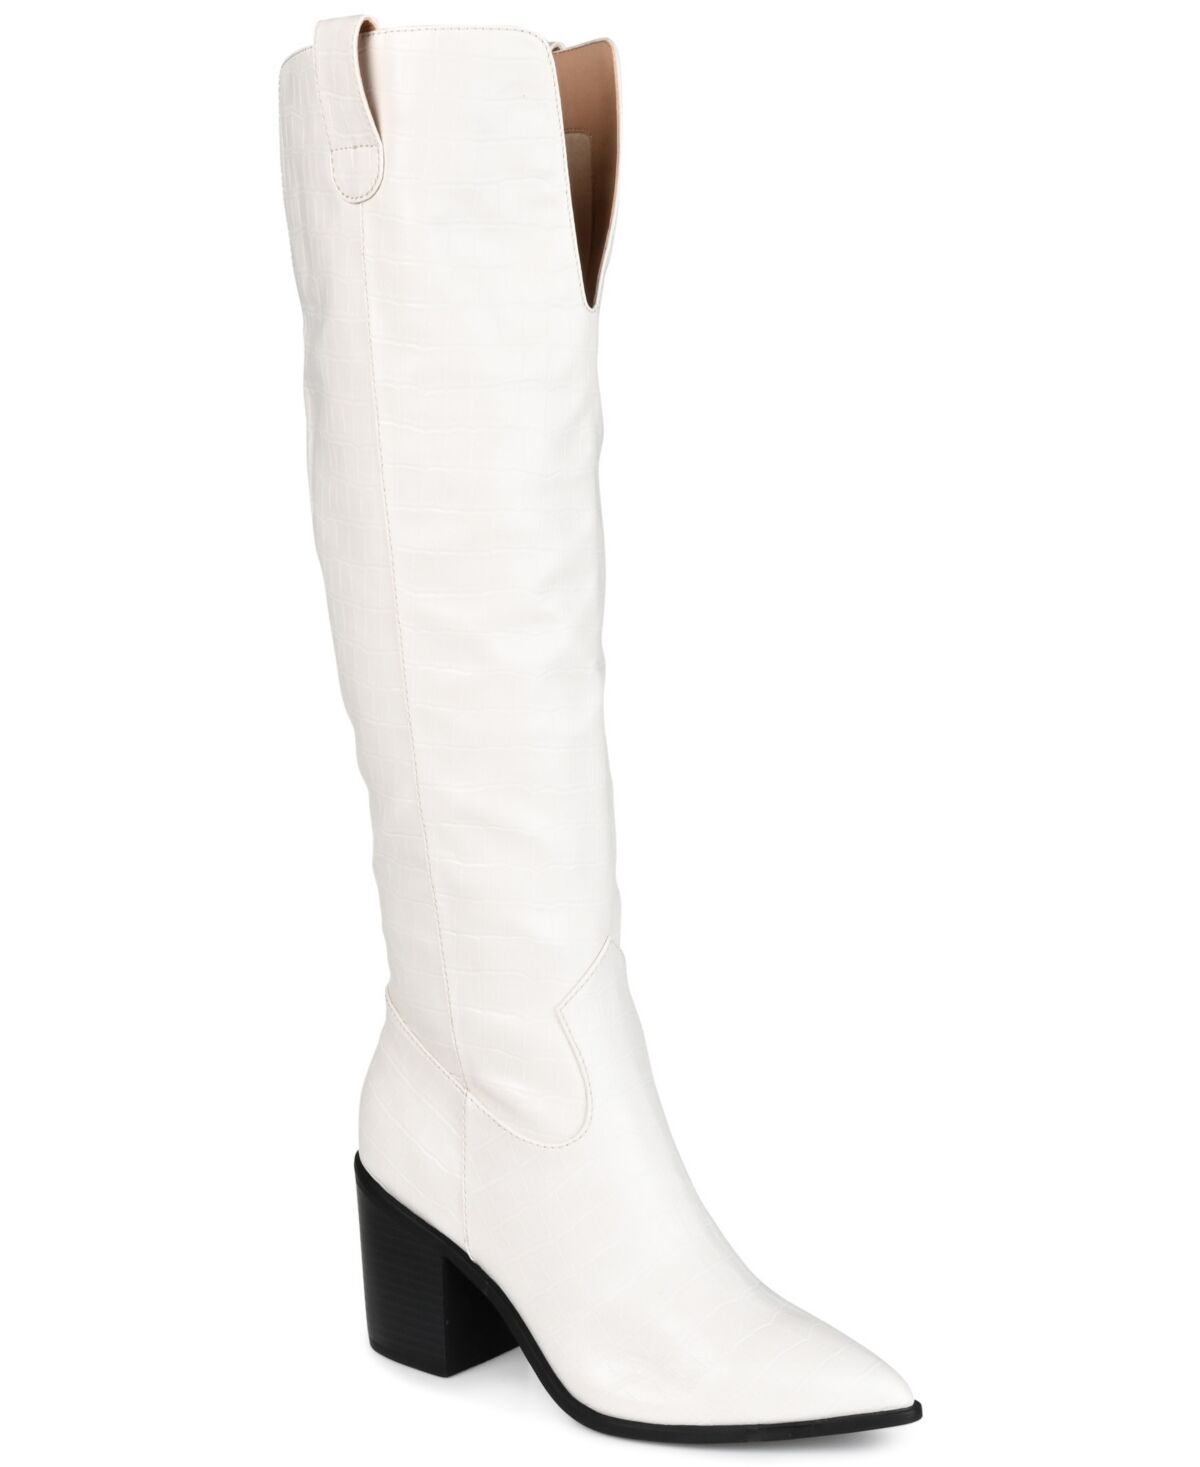 Journee Collection Women's Therese Extra Wide Calf Knee High Boots - Bone